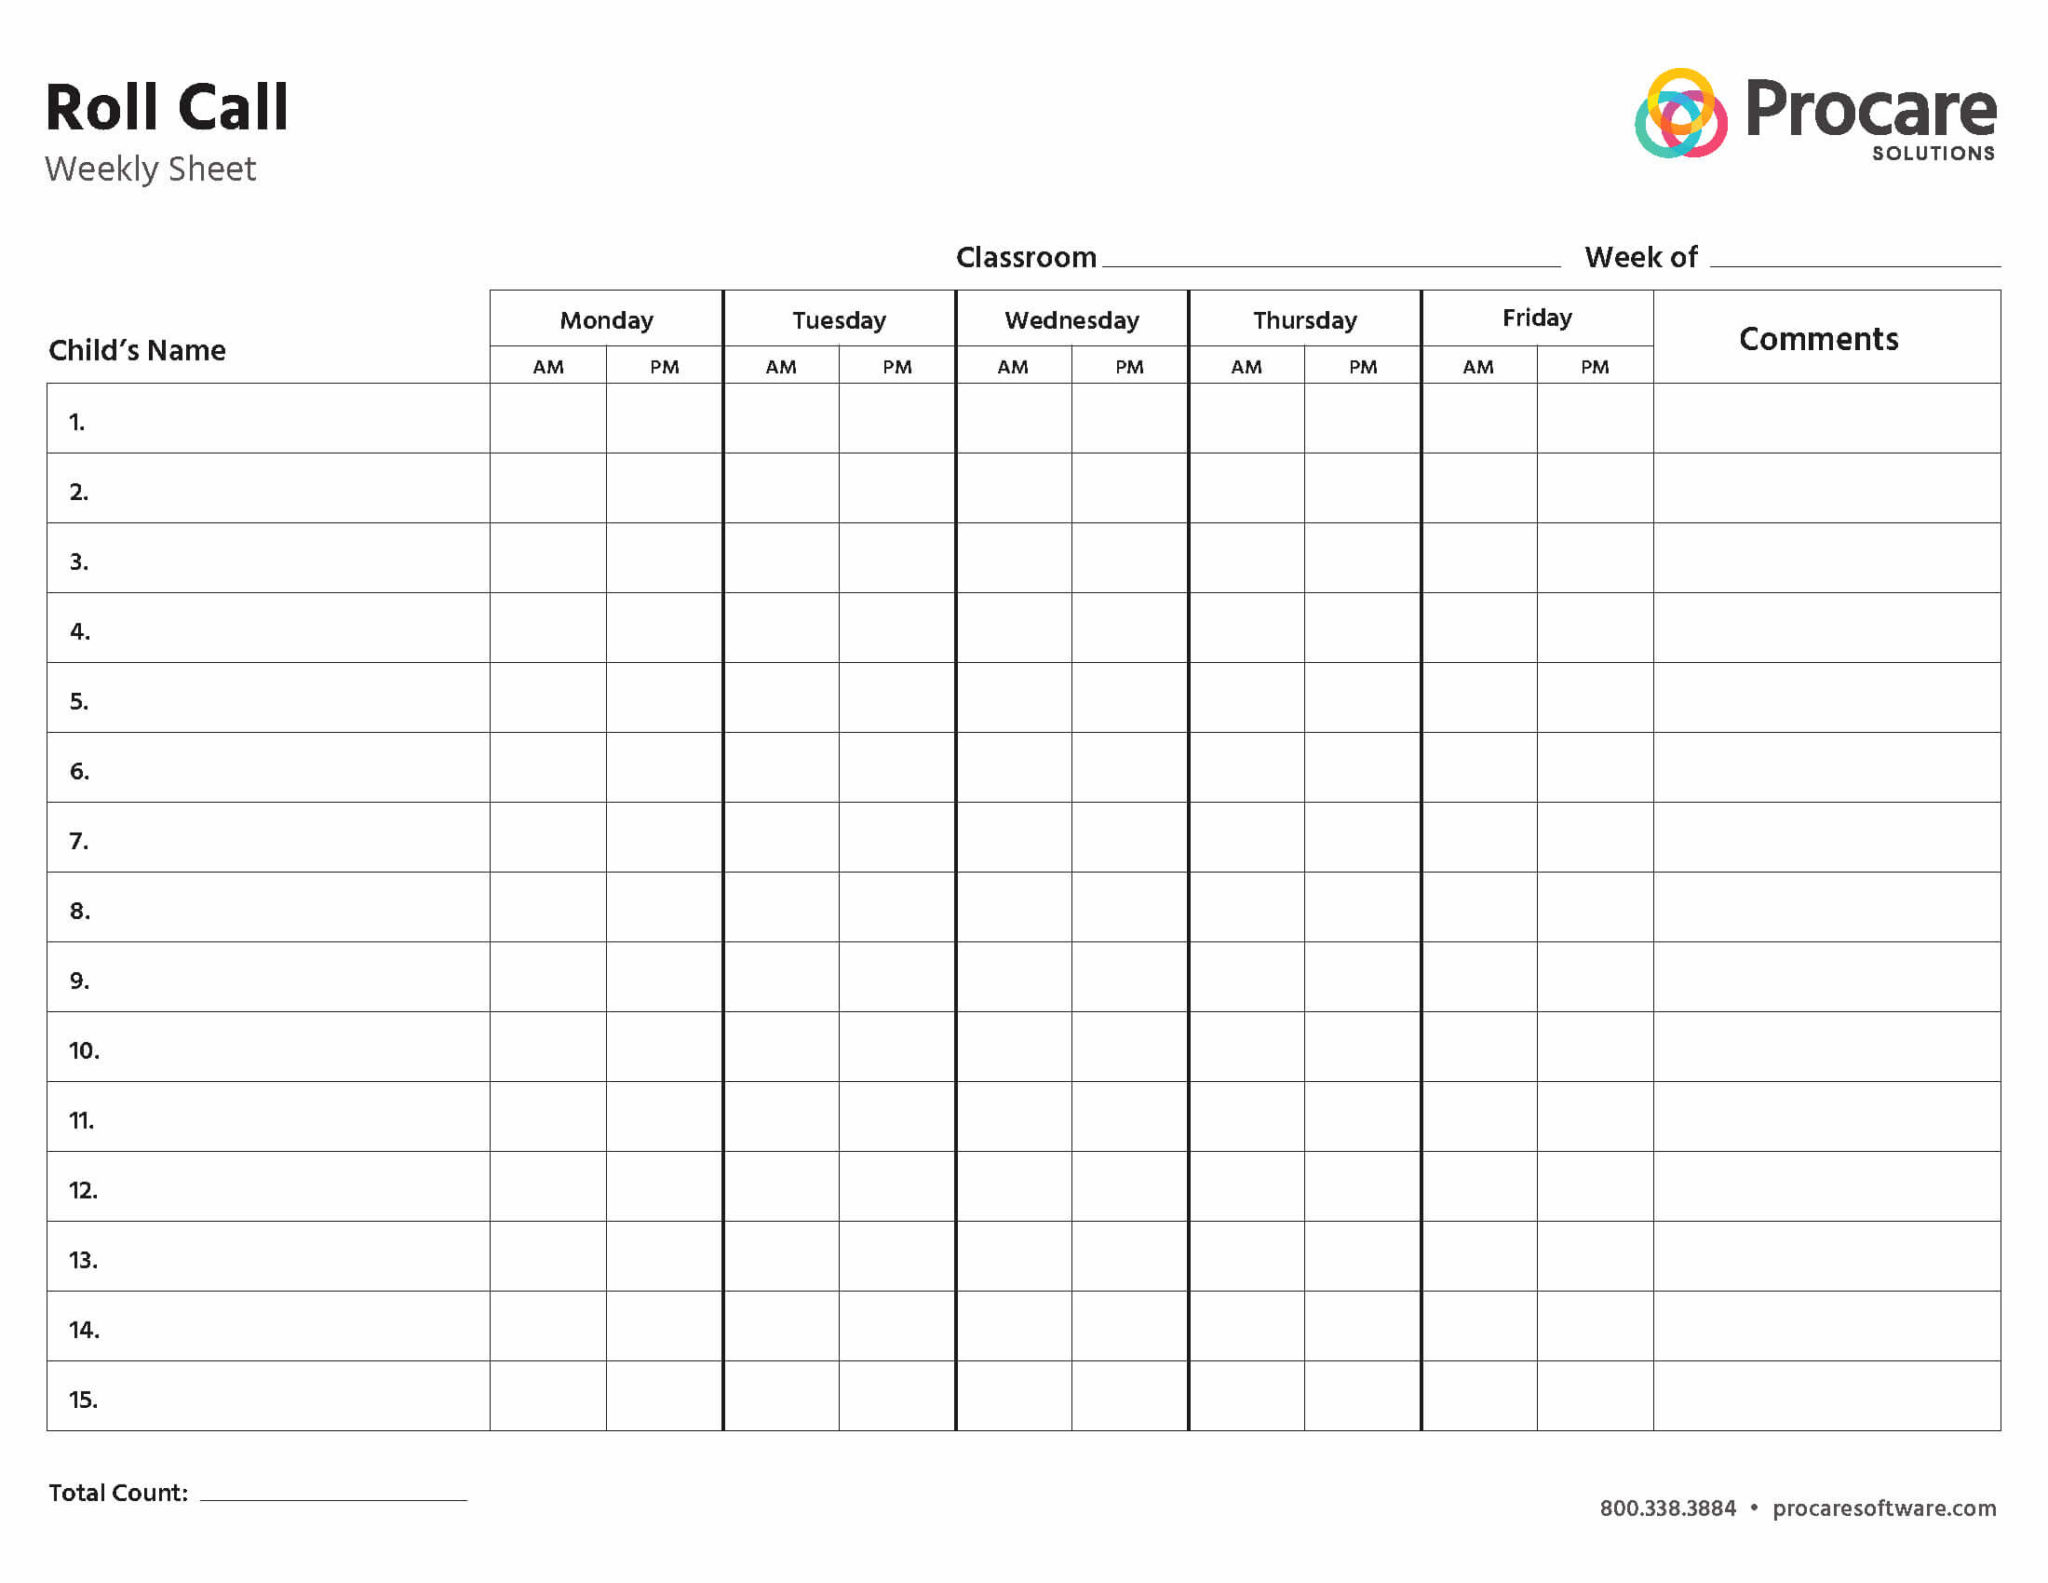 Roll Call/Attendance Sheets | Procare Solutions